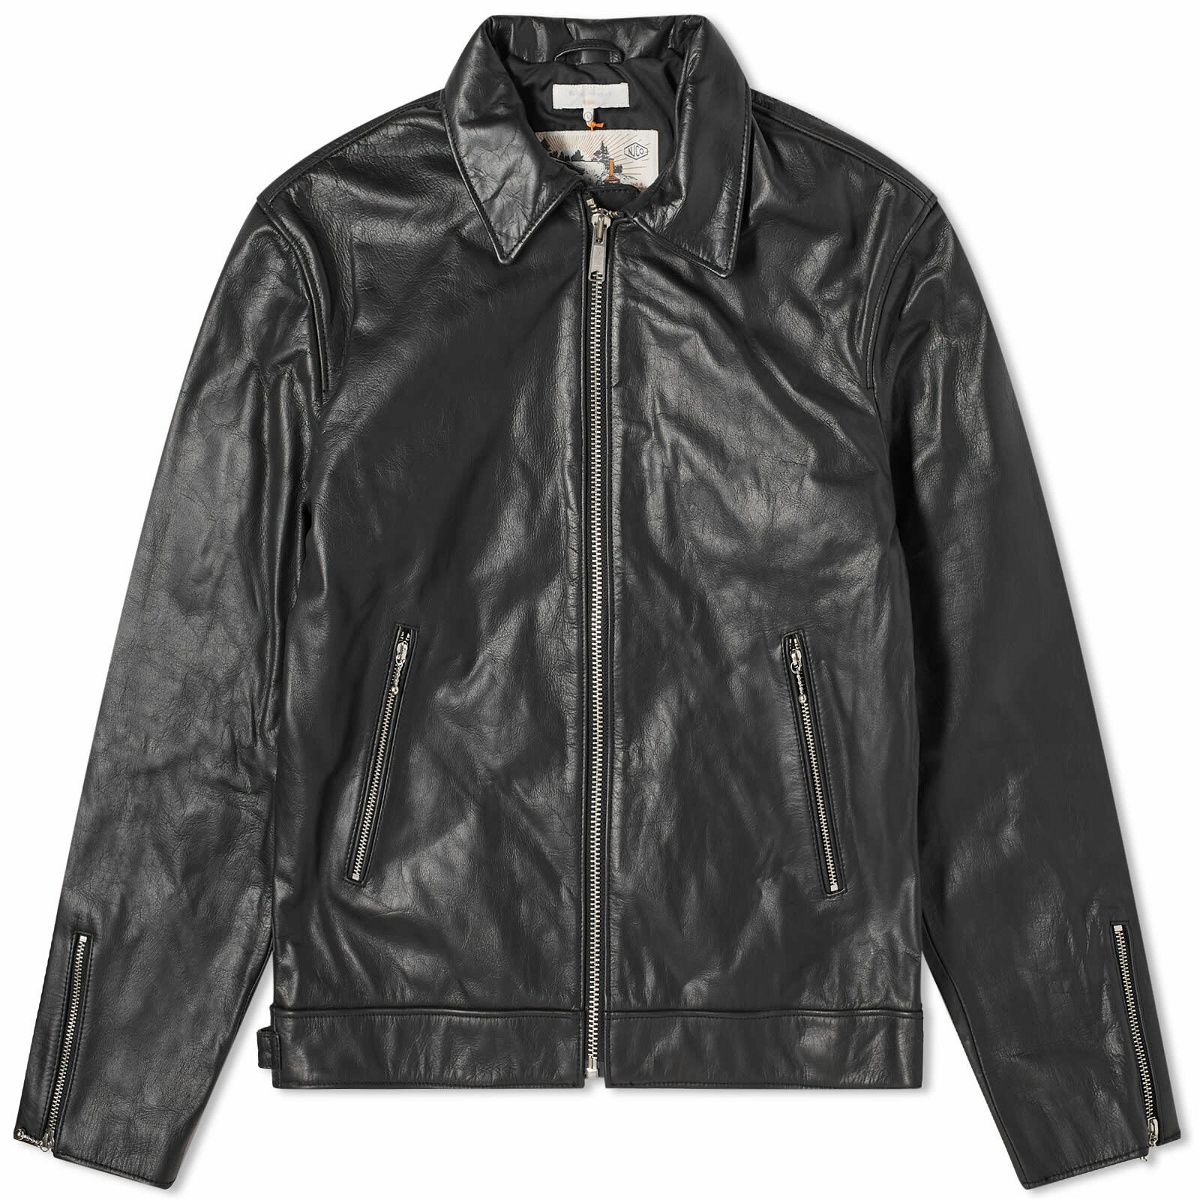 Photo: Nudie Jeans Co Men's Eddy Rider Leather Jacket in Black